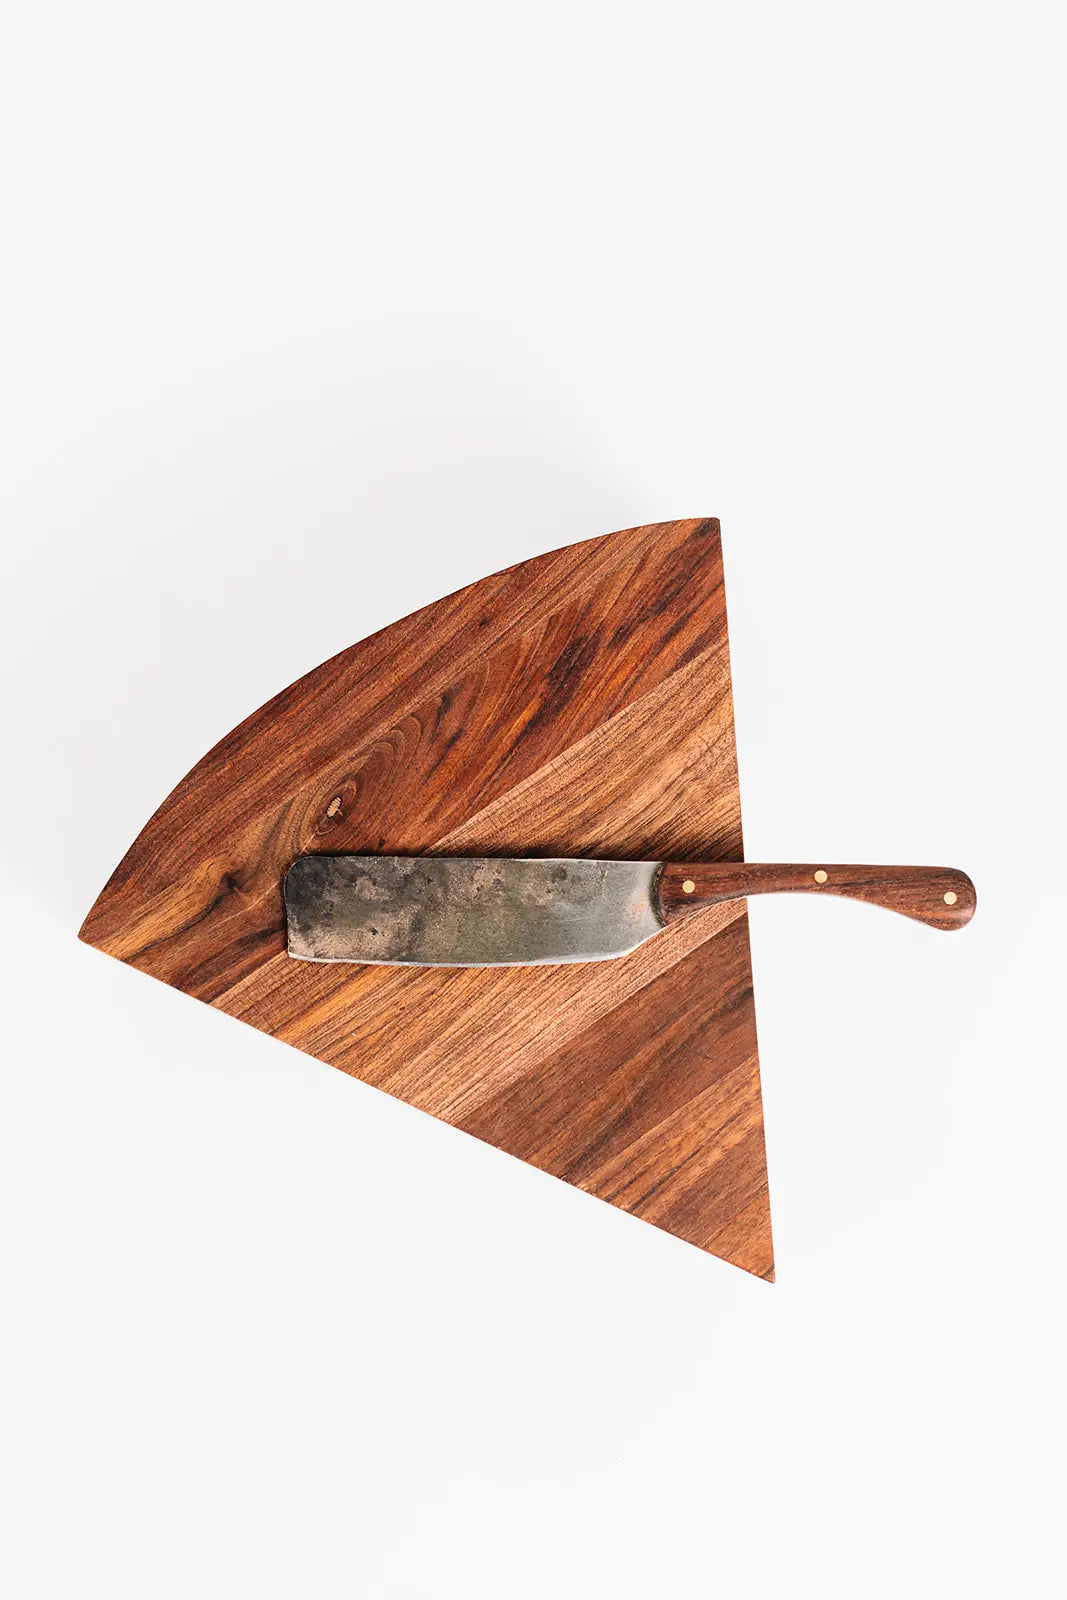 Millstream The Cheese Block with Hand Forged Knife